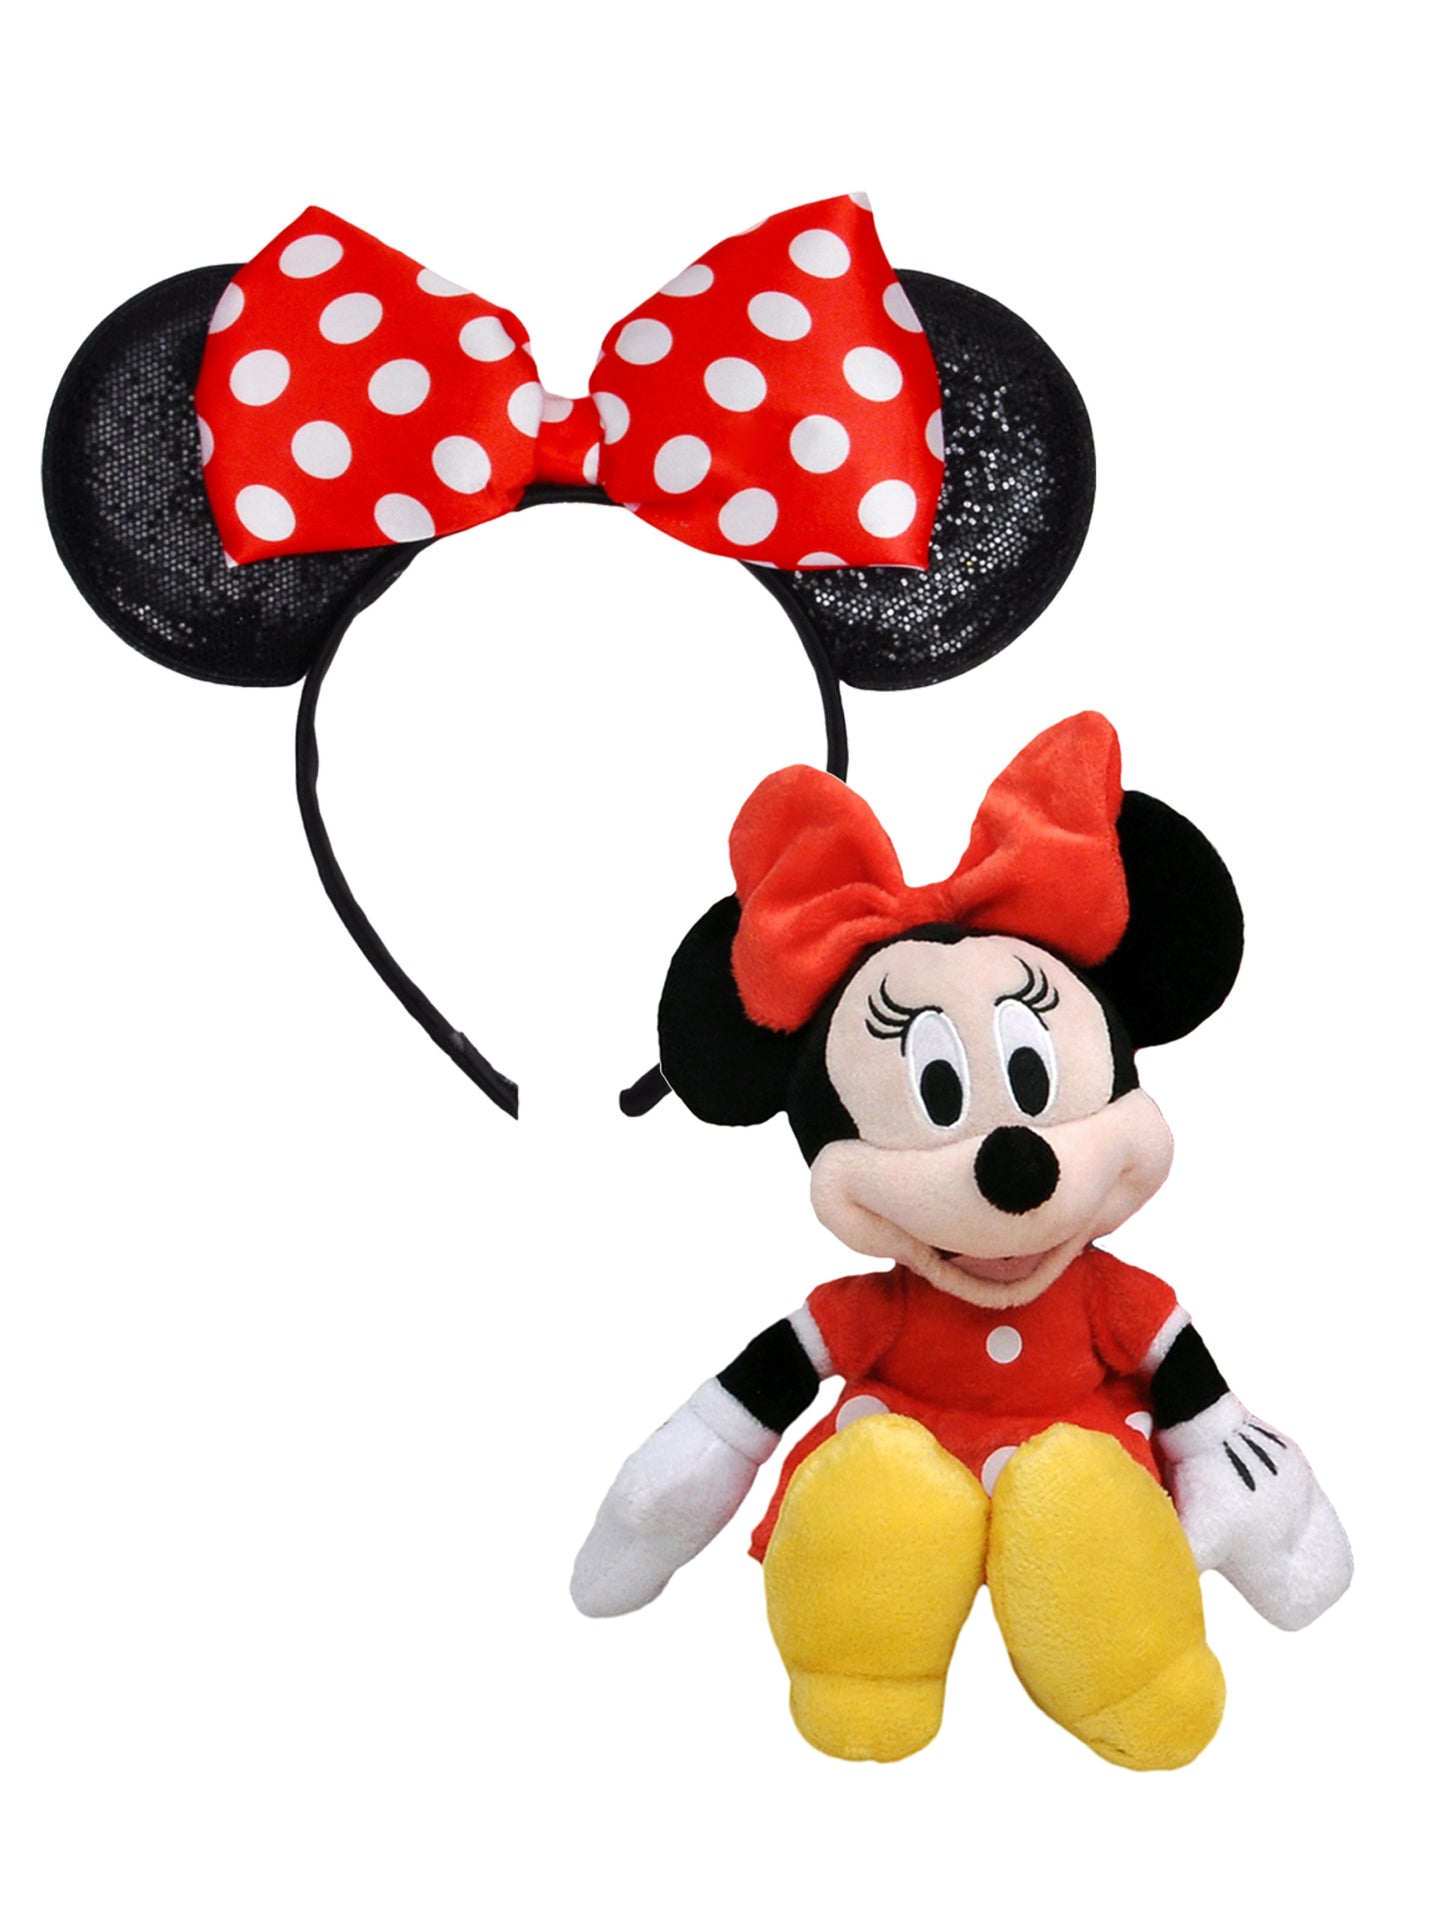 Minnie Mouse Plush Doll Toy 11" & Girls Minnie Headband with Ears Bow Red Set